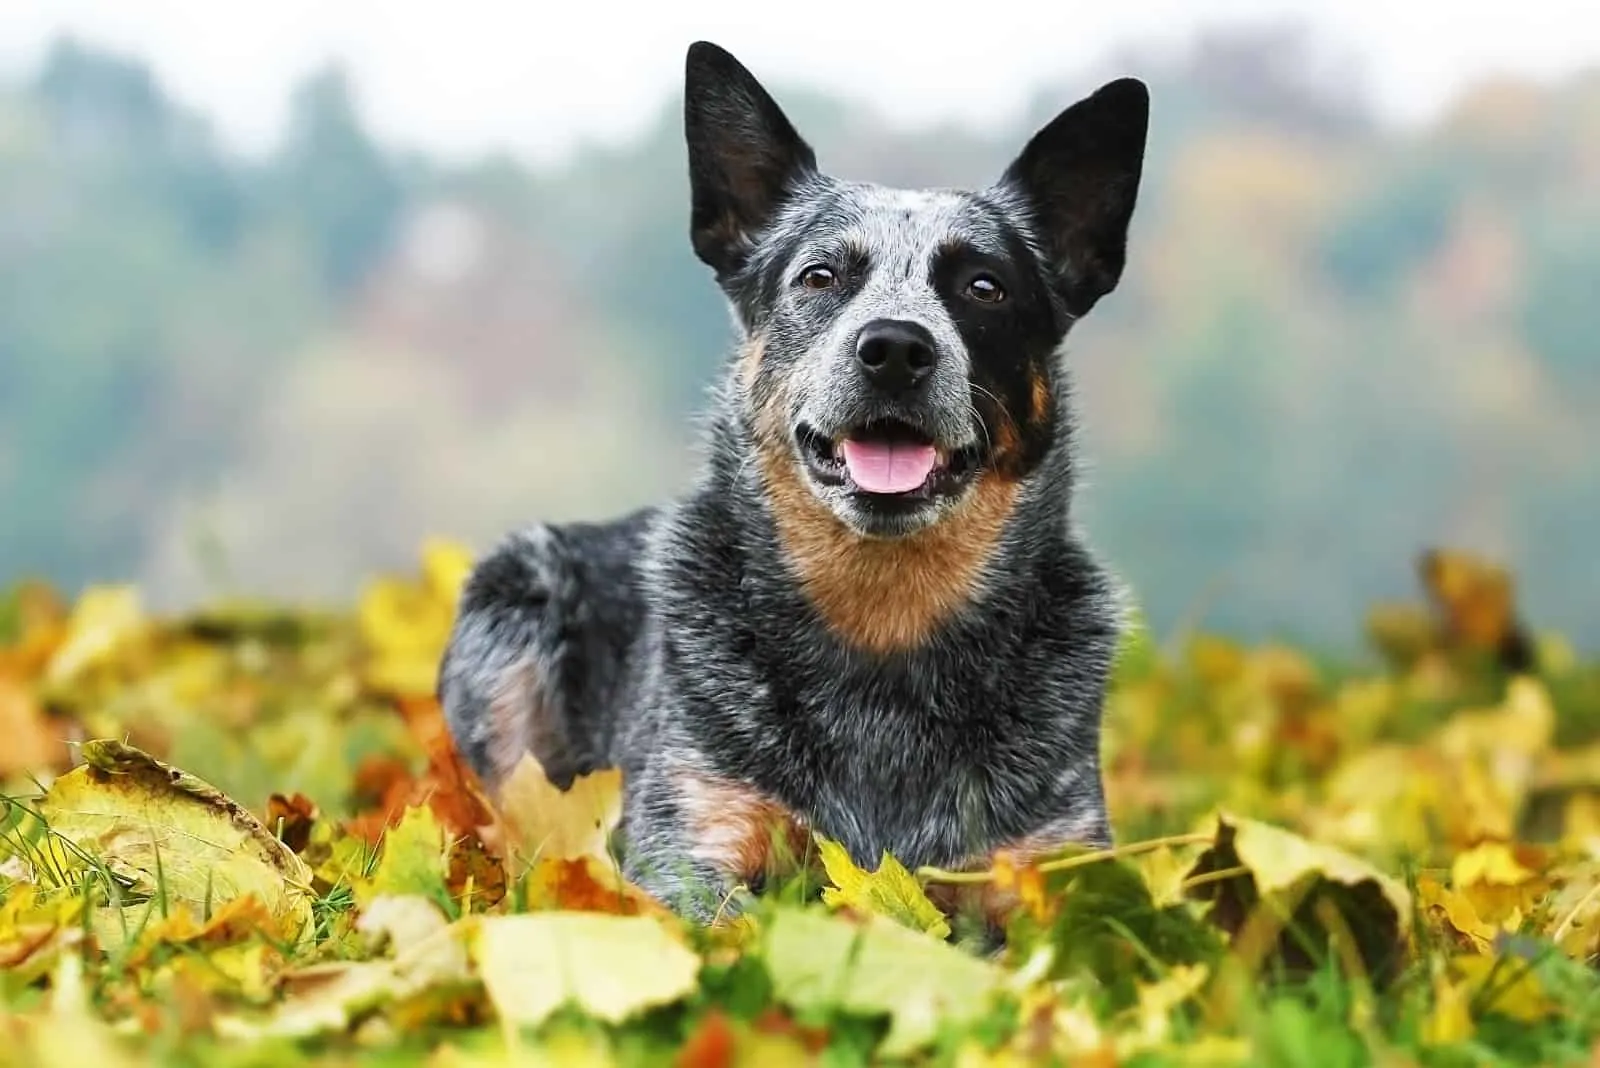 Australian Cattle Dog lies in the leaves